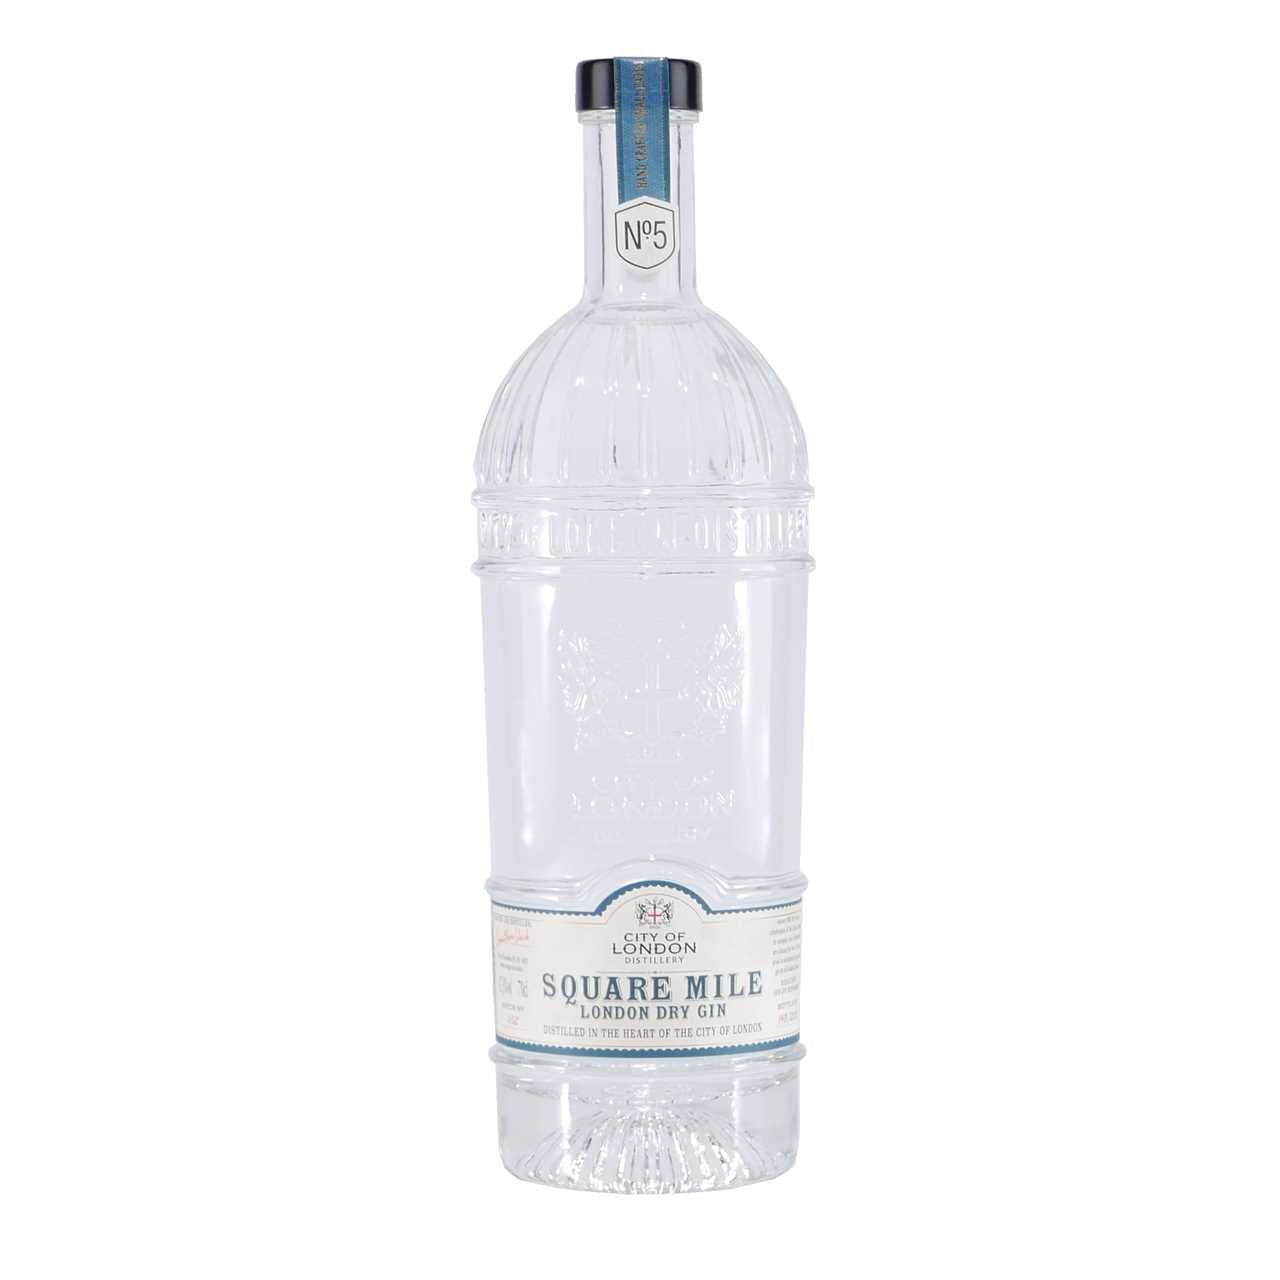 City of London Square Mile London Dry Gin No.5